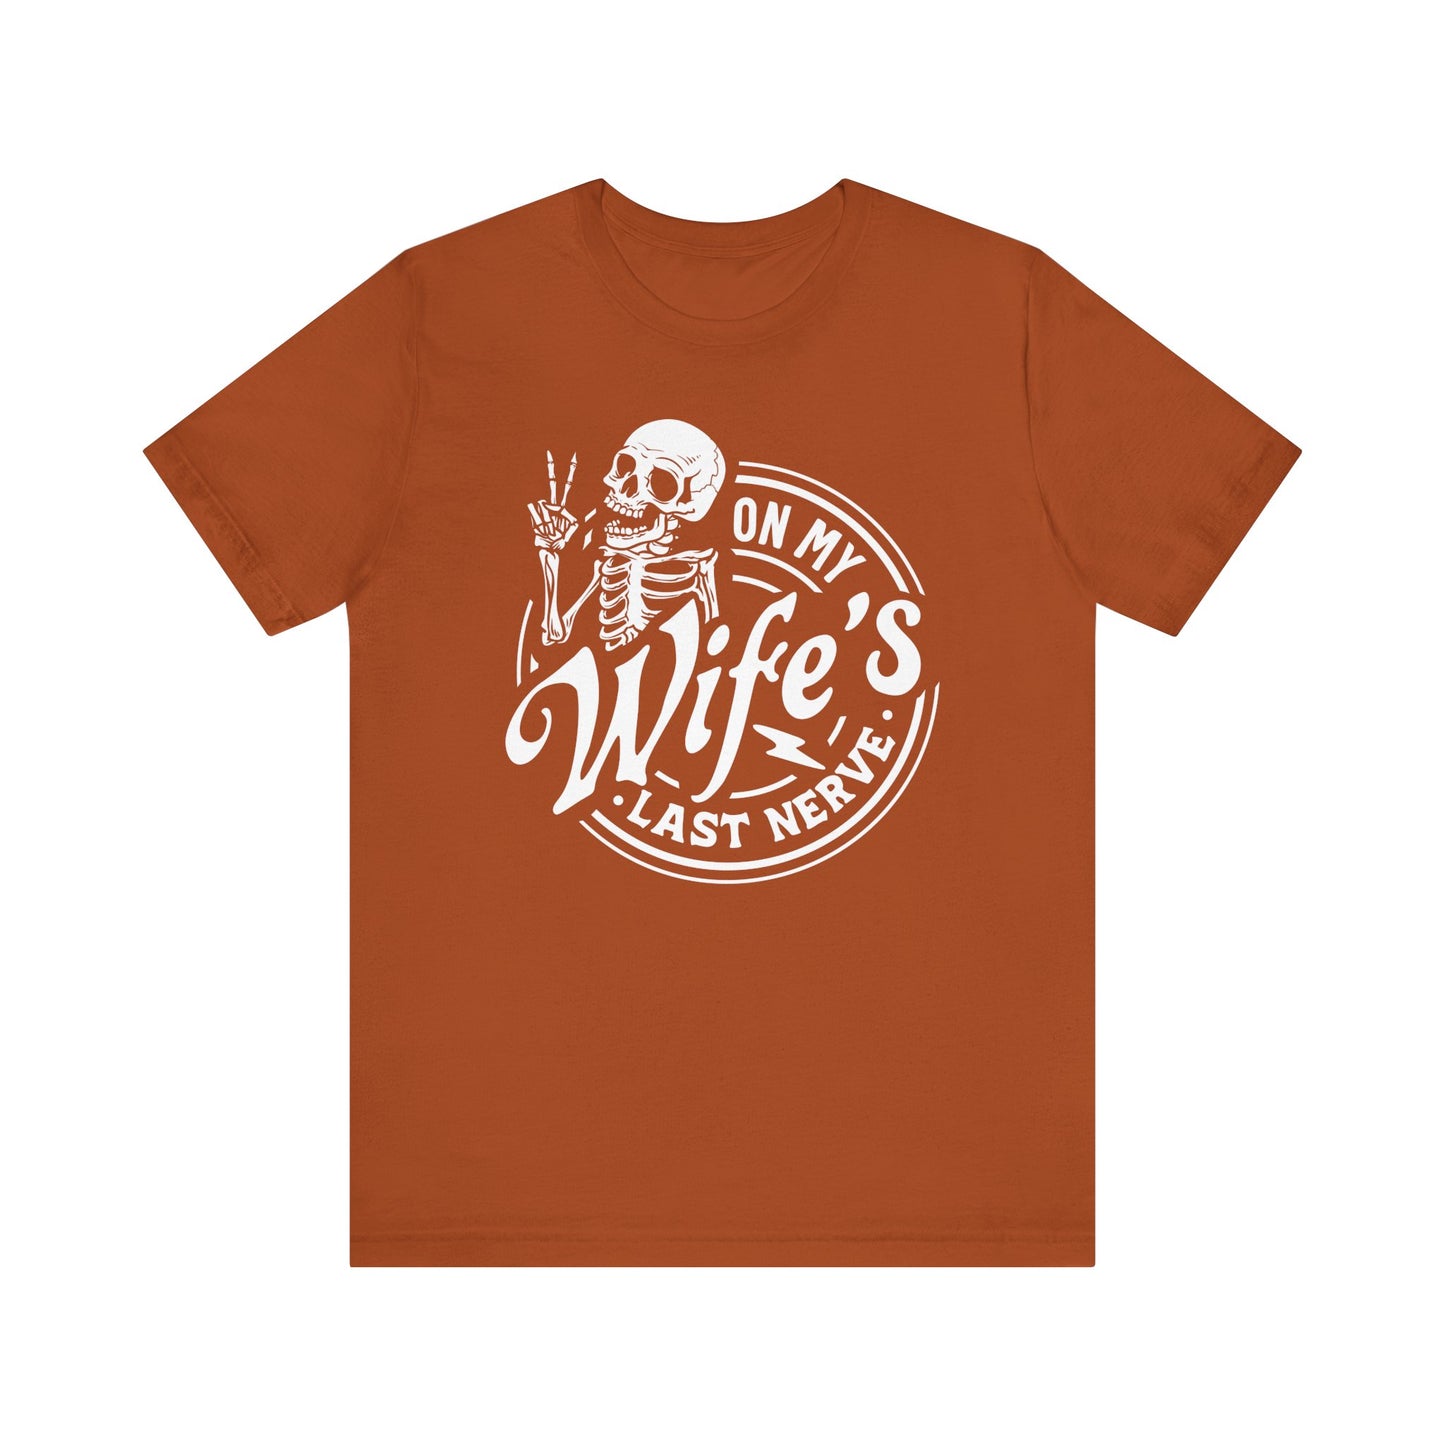 Sarcastic Husband T-Shirt For Snarky Skeleton TShirt for On Wife's Last Nerve T Shirt For Dad Gift